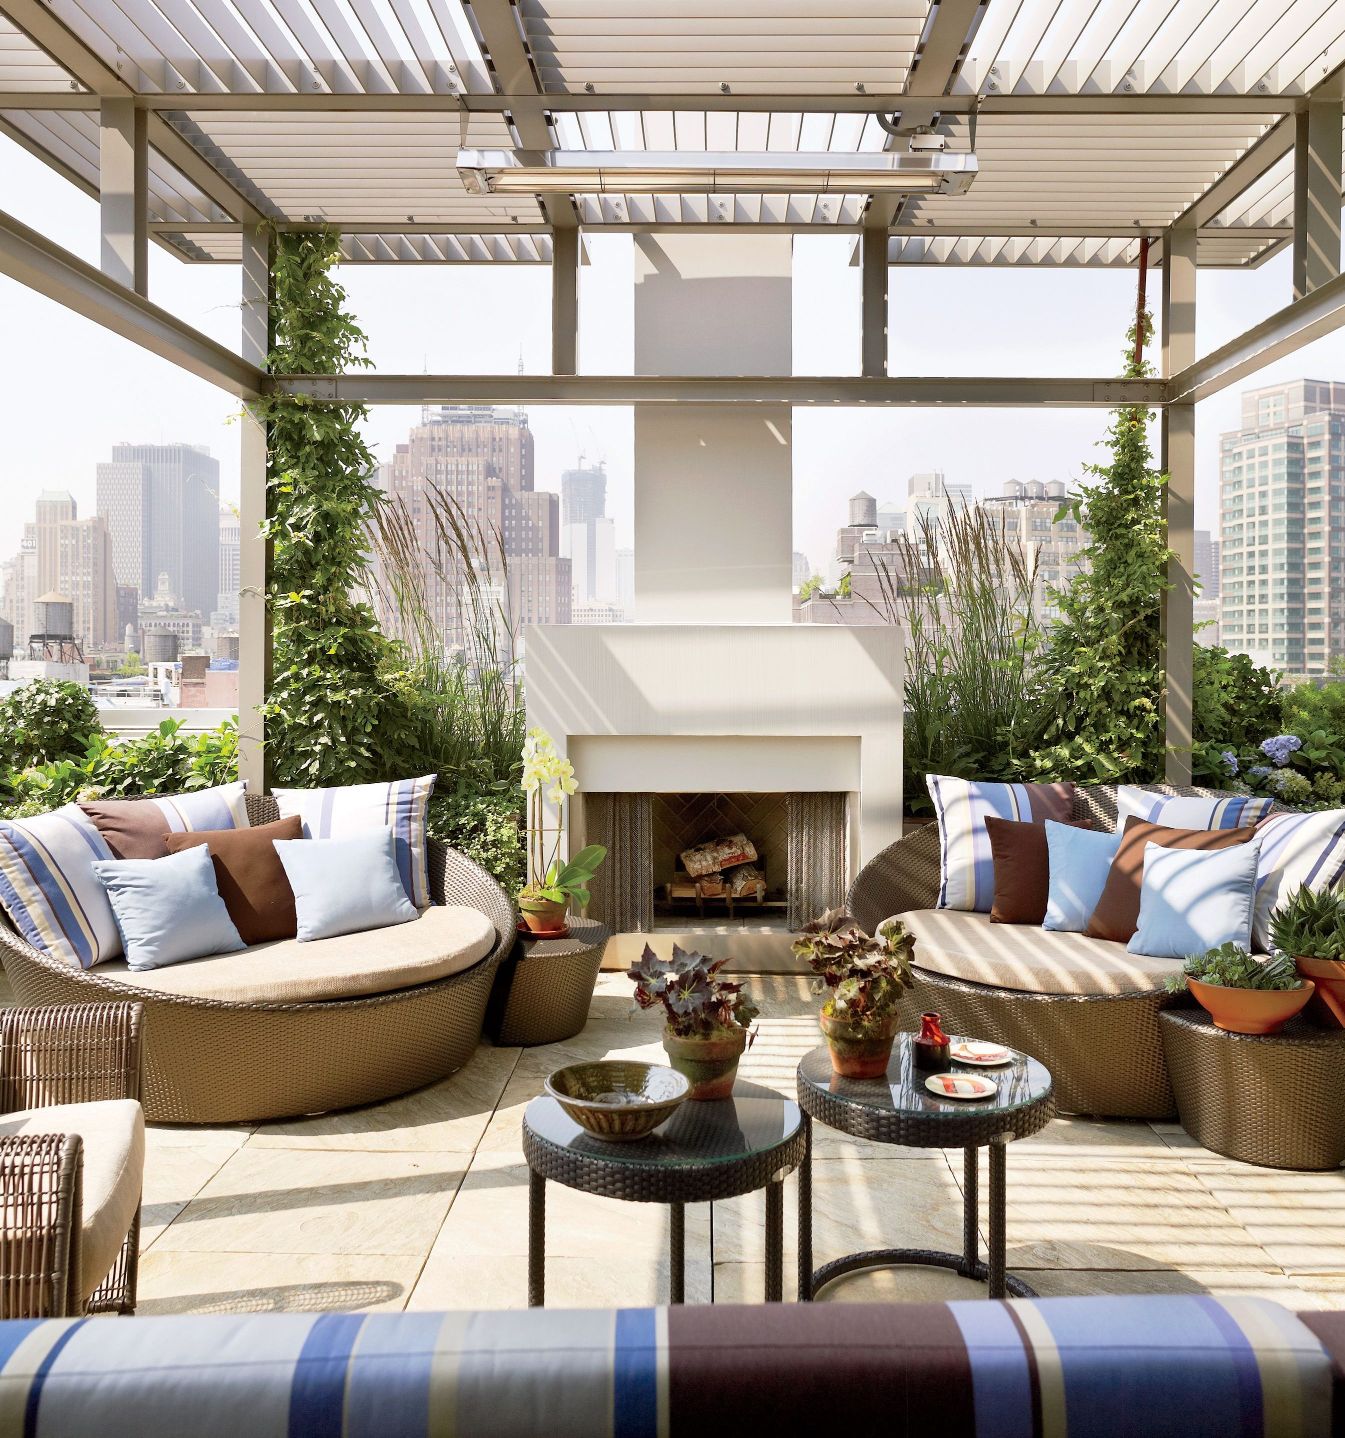 Refined rooftop hangout area with trellis and fireplaces